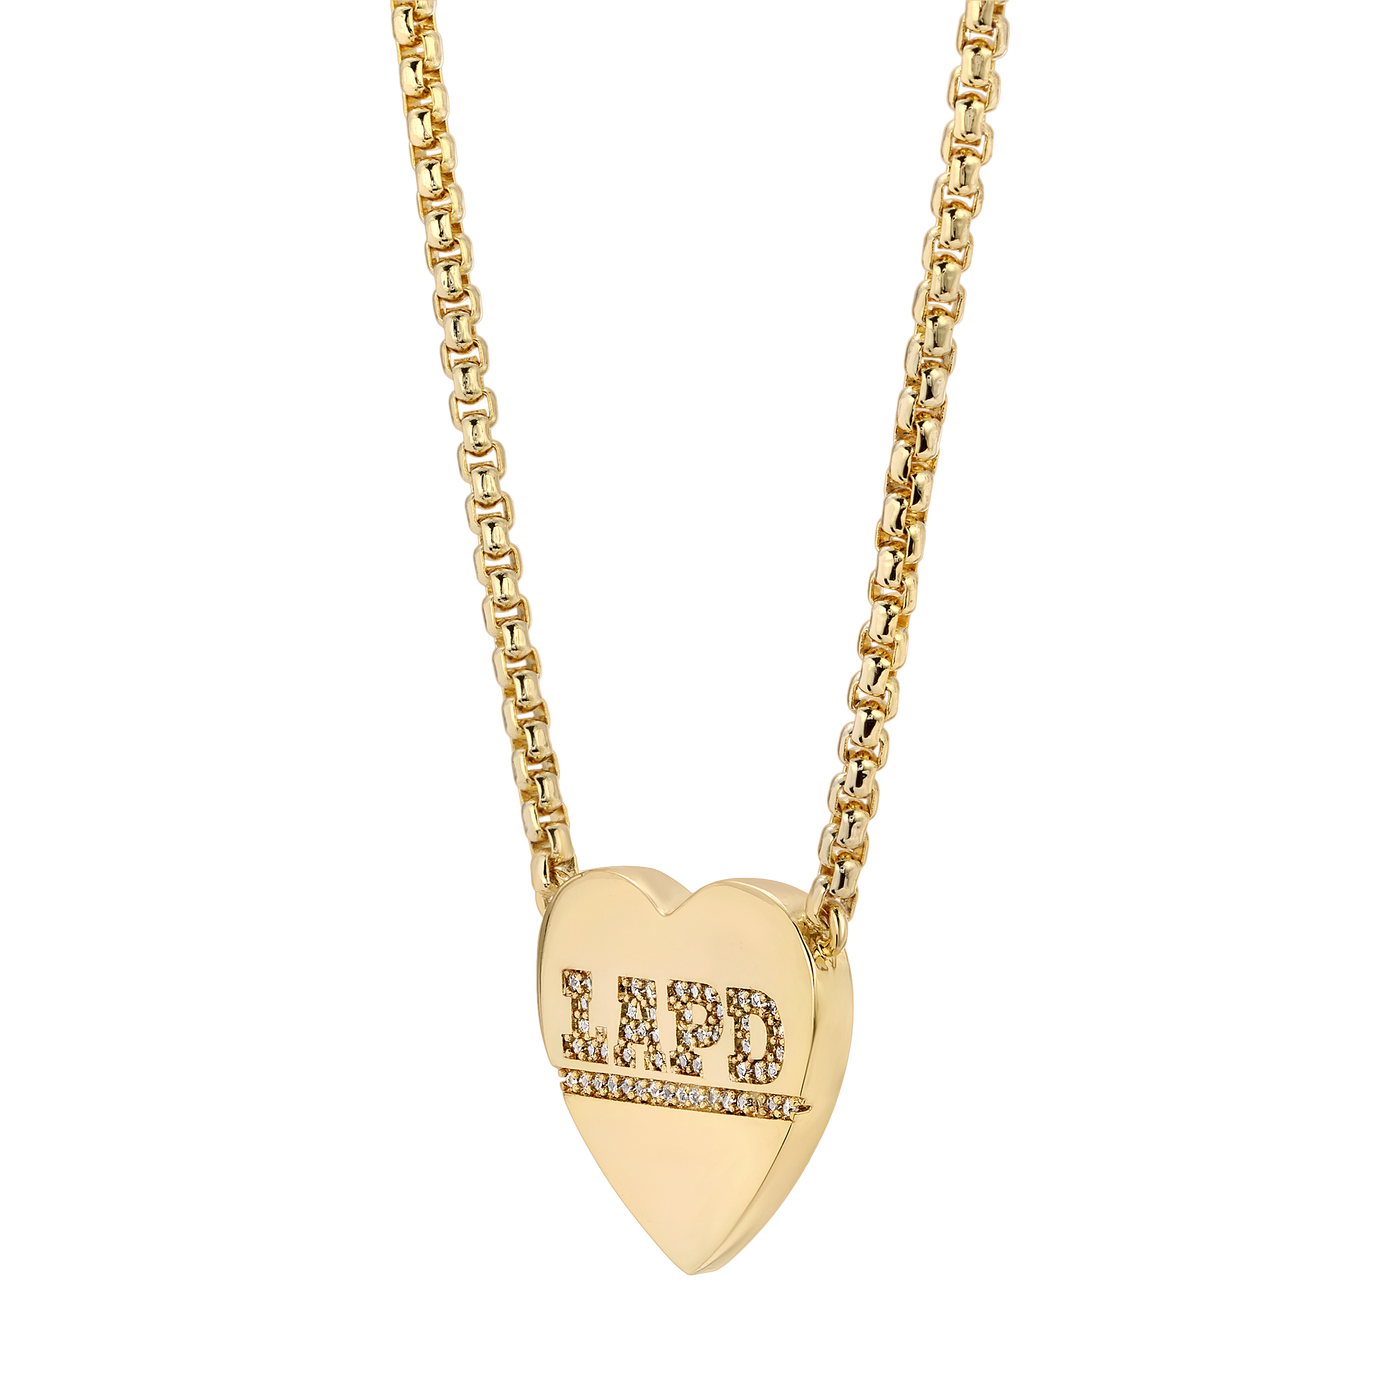 Safety Charm Necklace in Gold